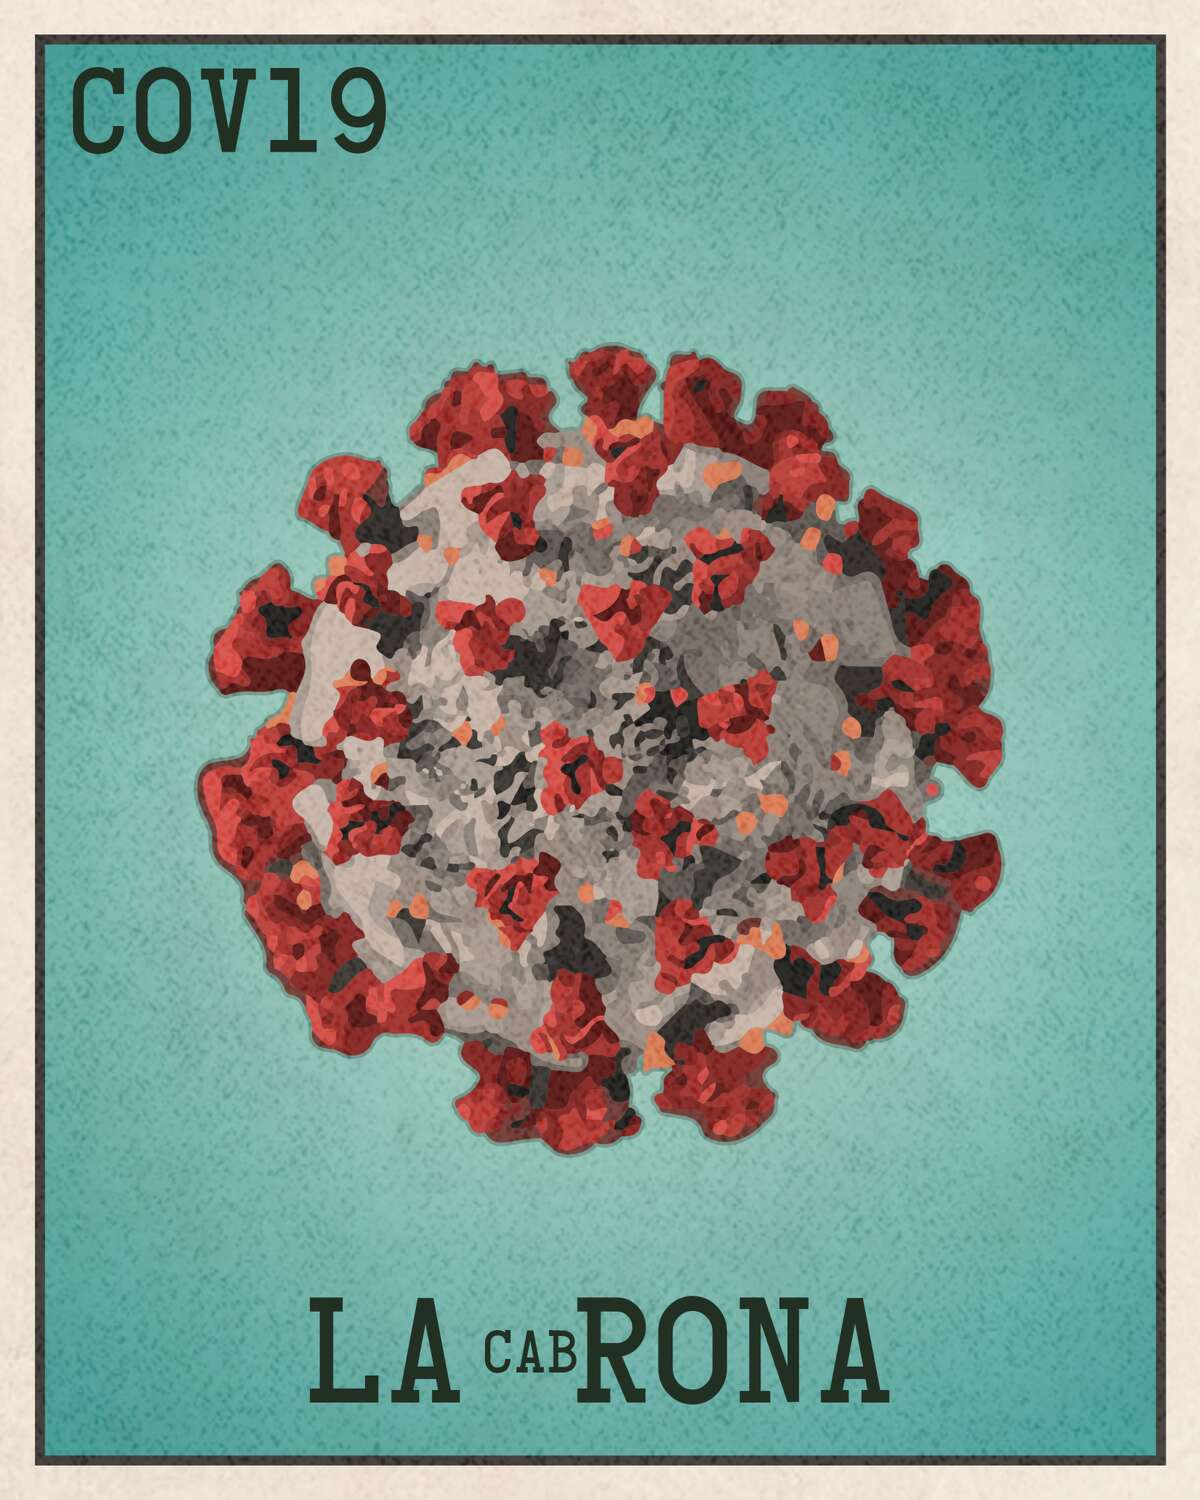 La cabRona San Antonio artist, Rafael Gonzales Jr. created his version of the popular Lotería game as an ode to the current COVID-19 outbreak calling it: "Pandemic Lotería." Each card depicts a play on words that speaks to the collective angst everyone is experiencing due to coronavirus said Gonzales.